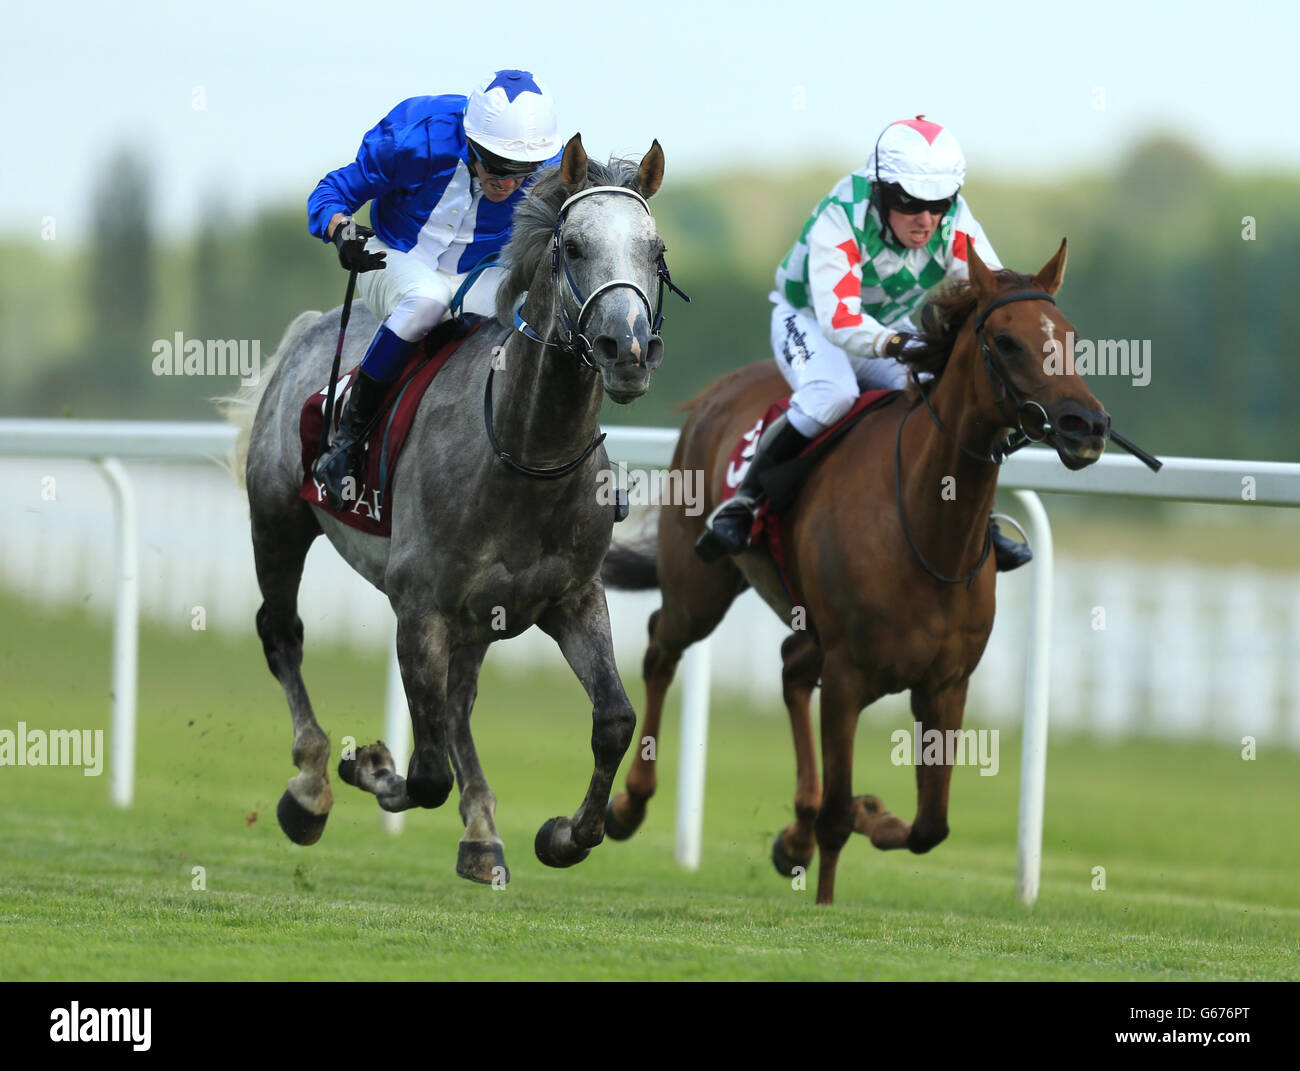 Man of Dreams (left) ridden by D.Turner beats Sophia ridden by M. Stanley to win the Qatar Racing and Equestrian Club Premier Handicap Stakes Stock Photo